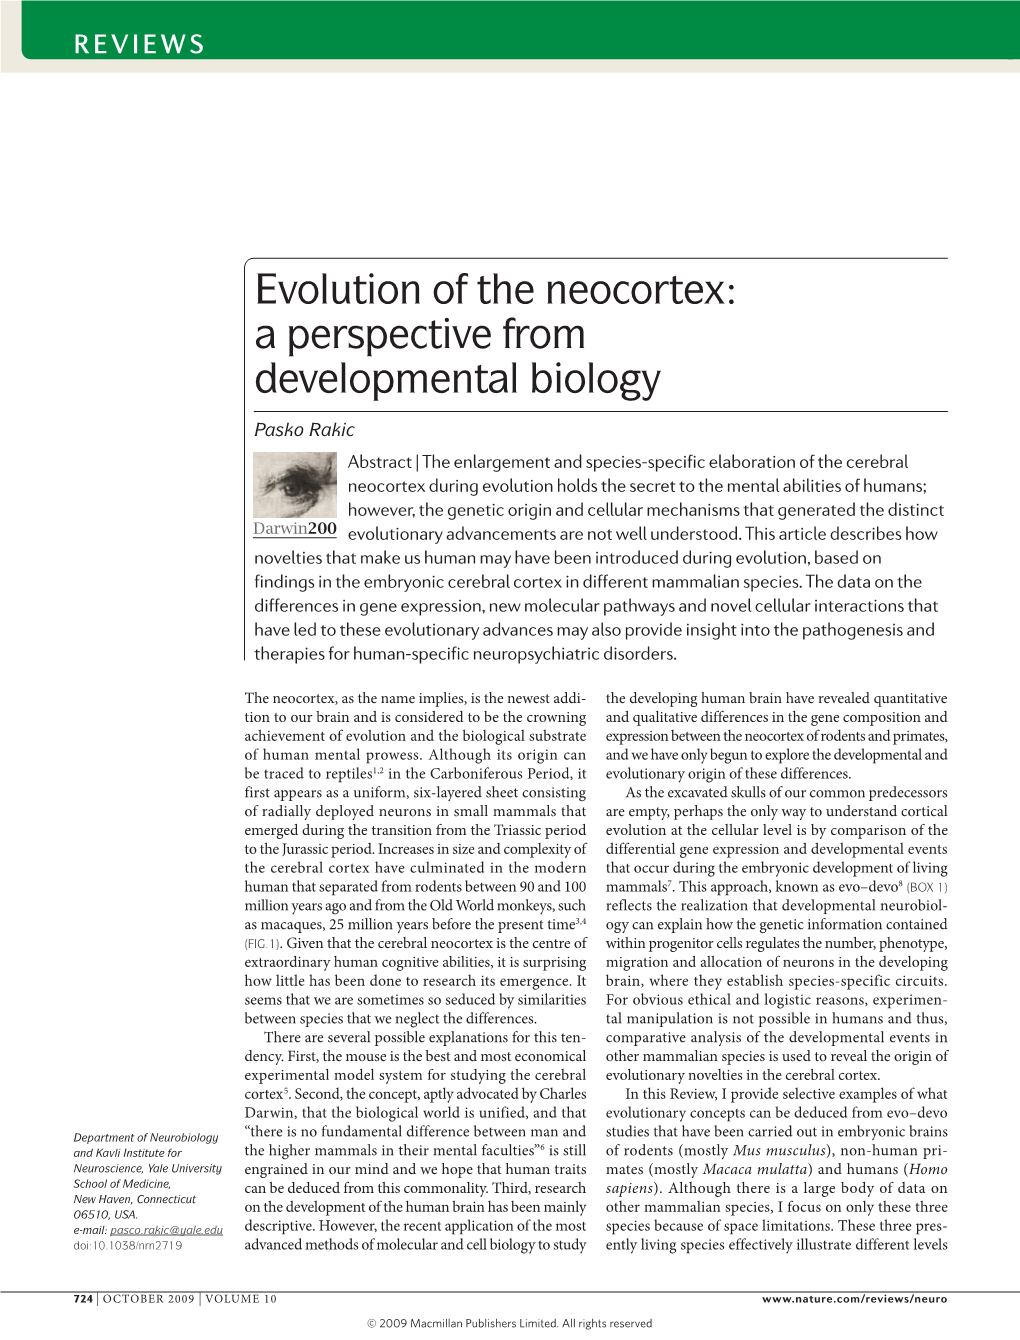 Evolution of the Neocortex: a Perspective from Developmental Biology